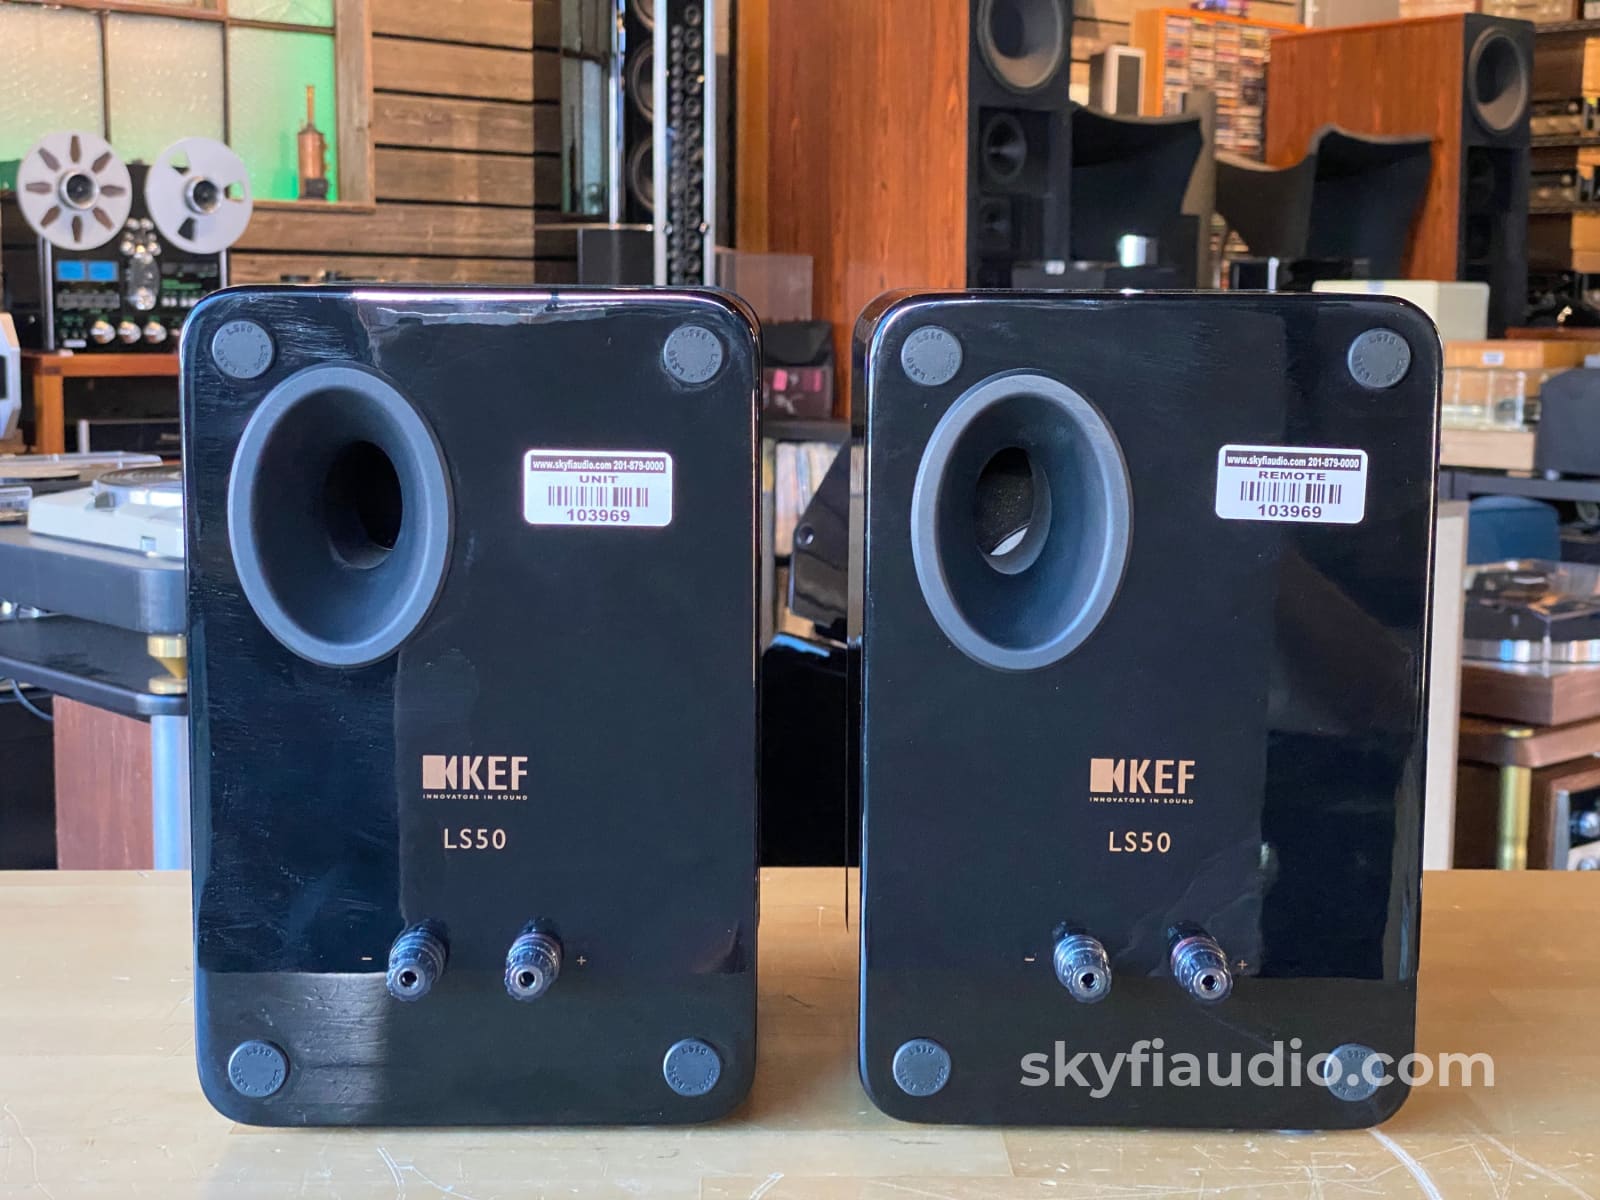 Kef Ls50 Bookshelf Speakers - Highly Reviewed Stereophile Class A